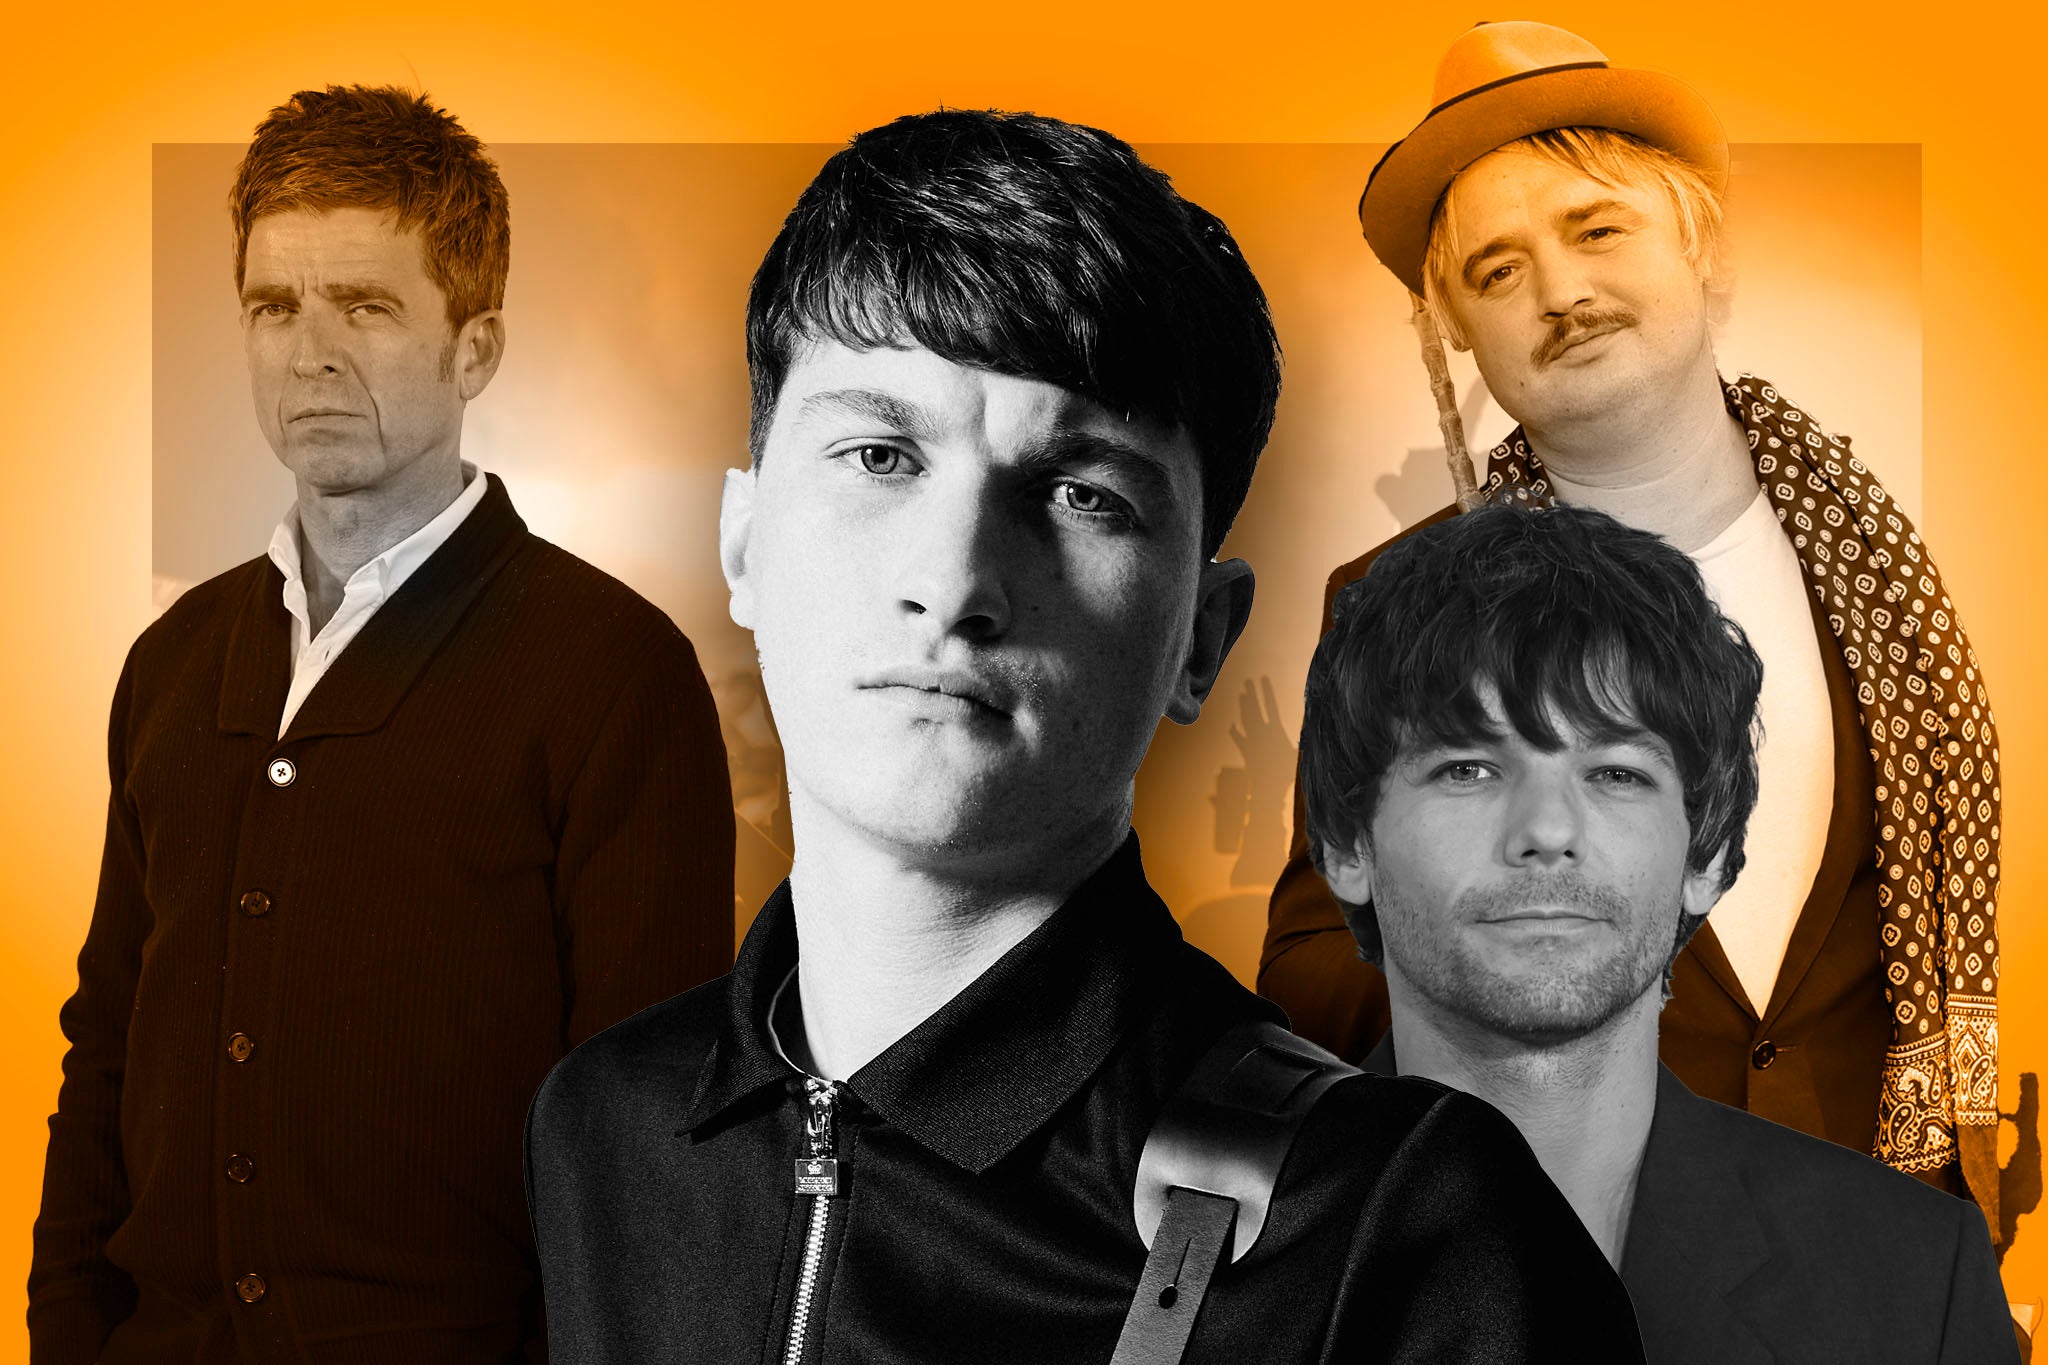 Noel Gallagher, Louis Tomlinson and Peter Doherty are throwing their weight behind Andrew Cushin